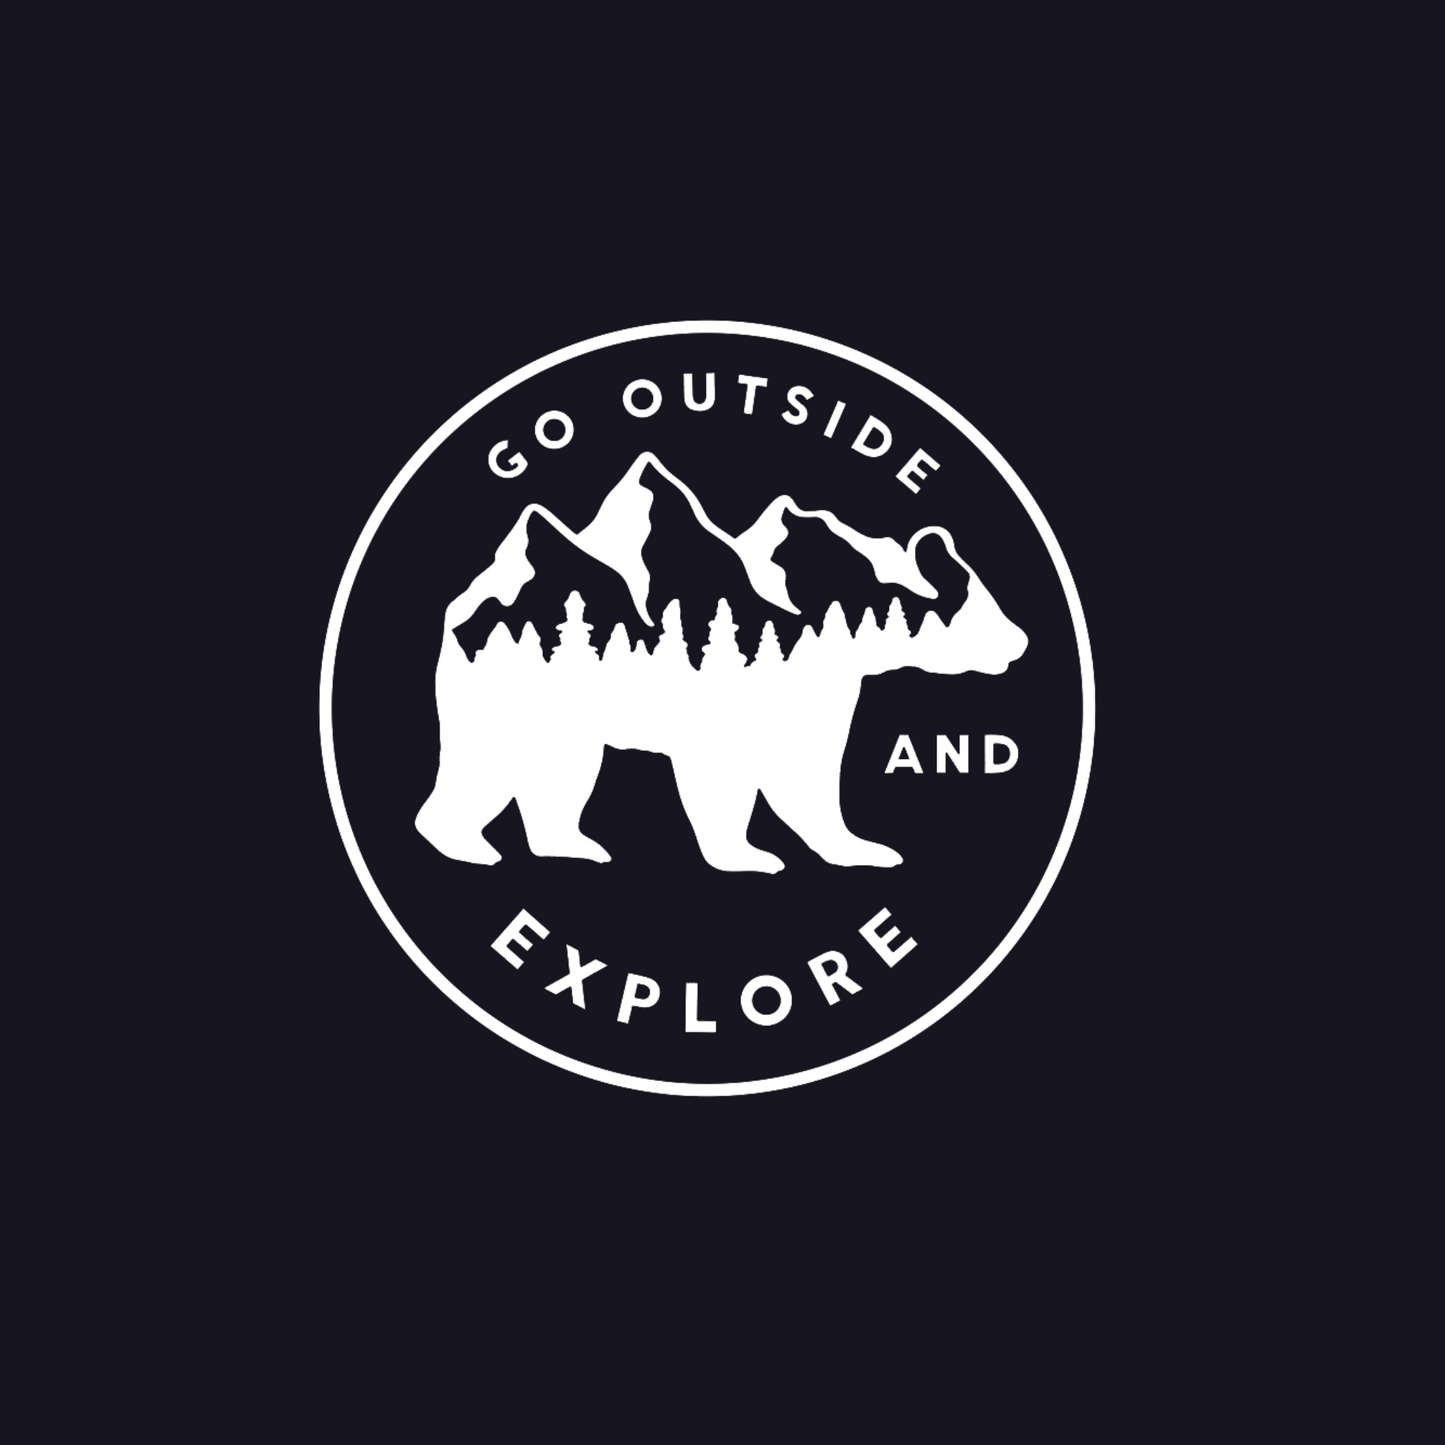 Go Outside & Explore - T-Shirt front view design with bear